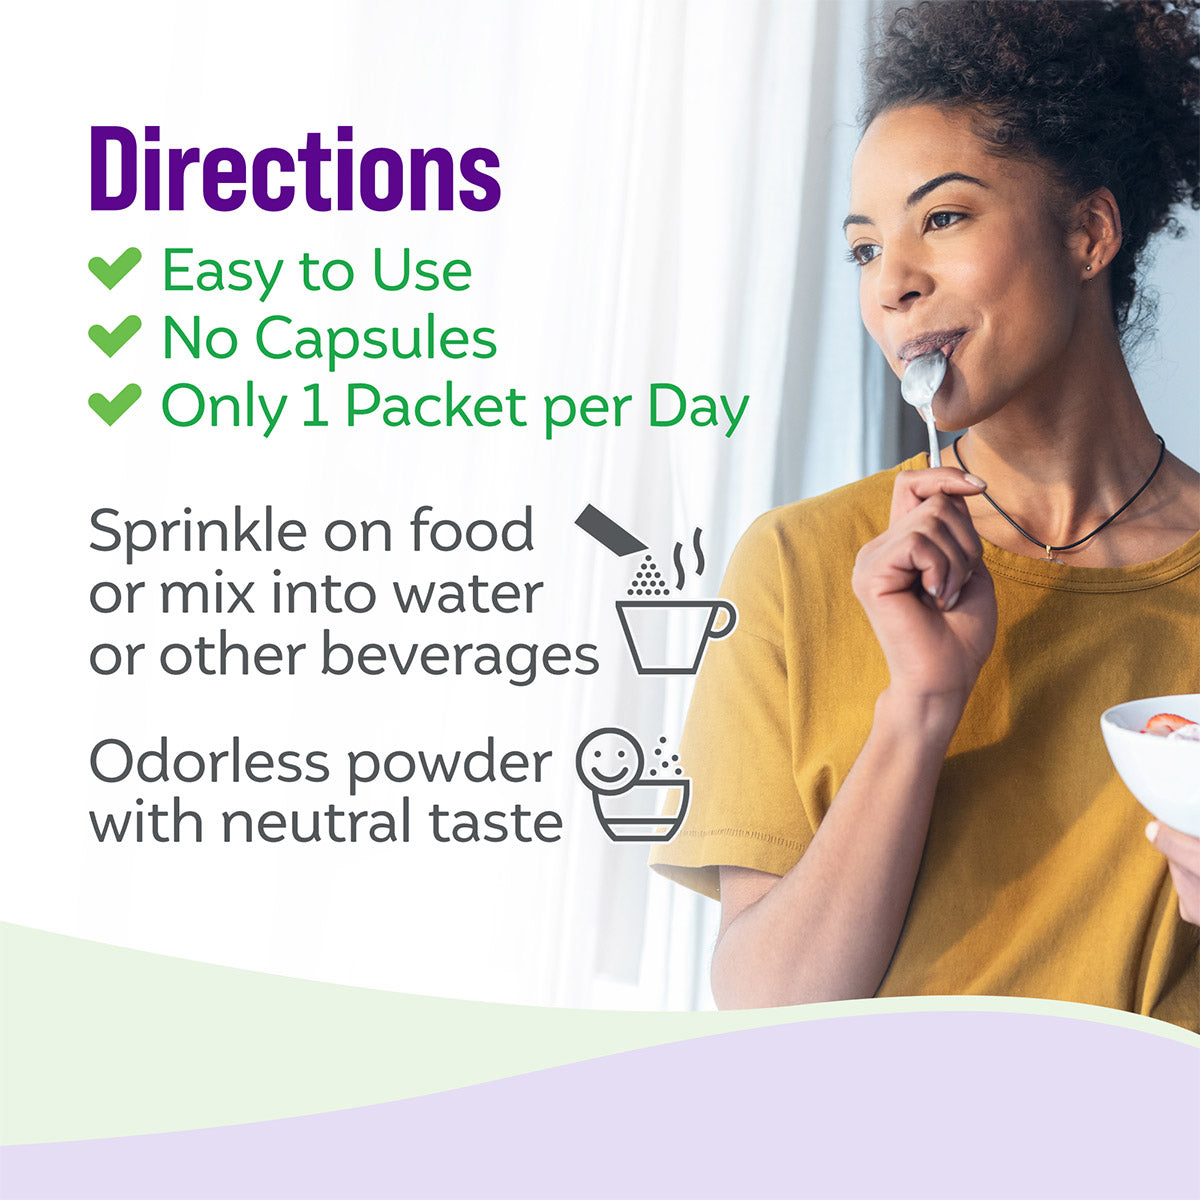 directions, easy to use, no capsules, only 1 packet per day. Sprinkle on food or mix into water or other beverages. Odorless powder with neutral taste.